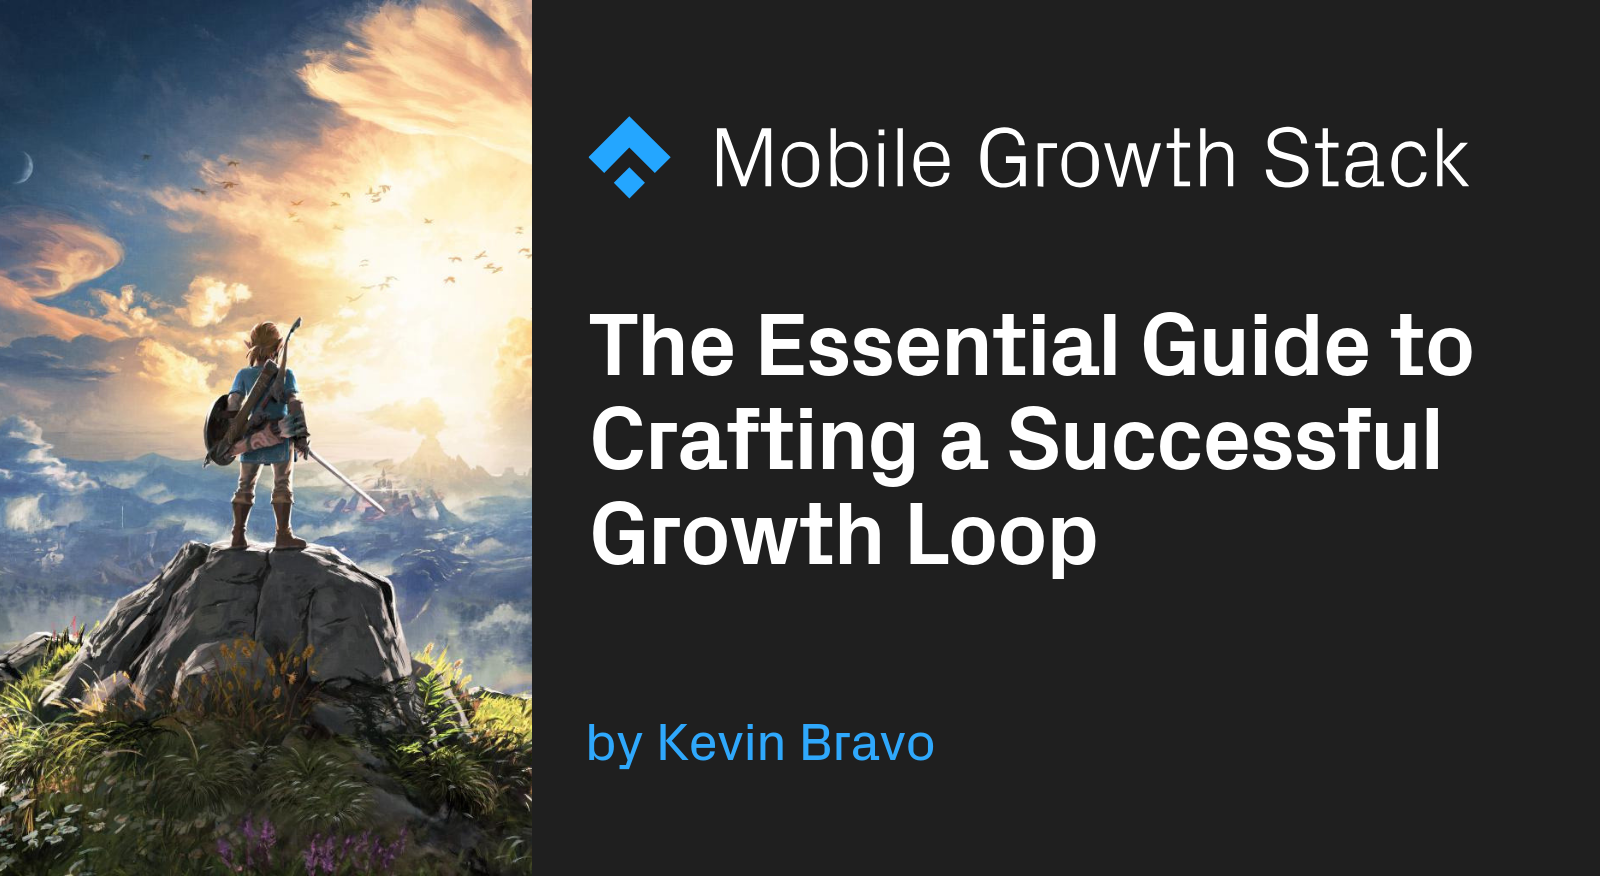 The essential guide to crafting a successful Growth Loop.